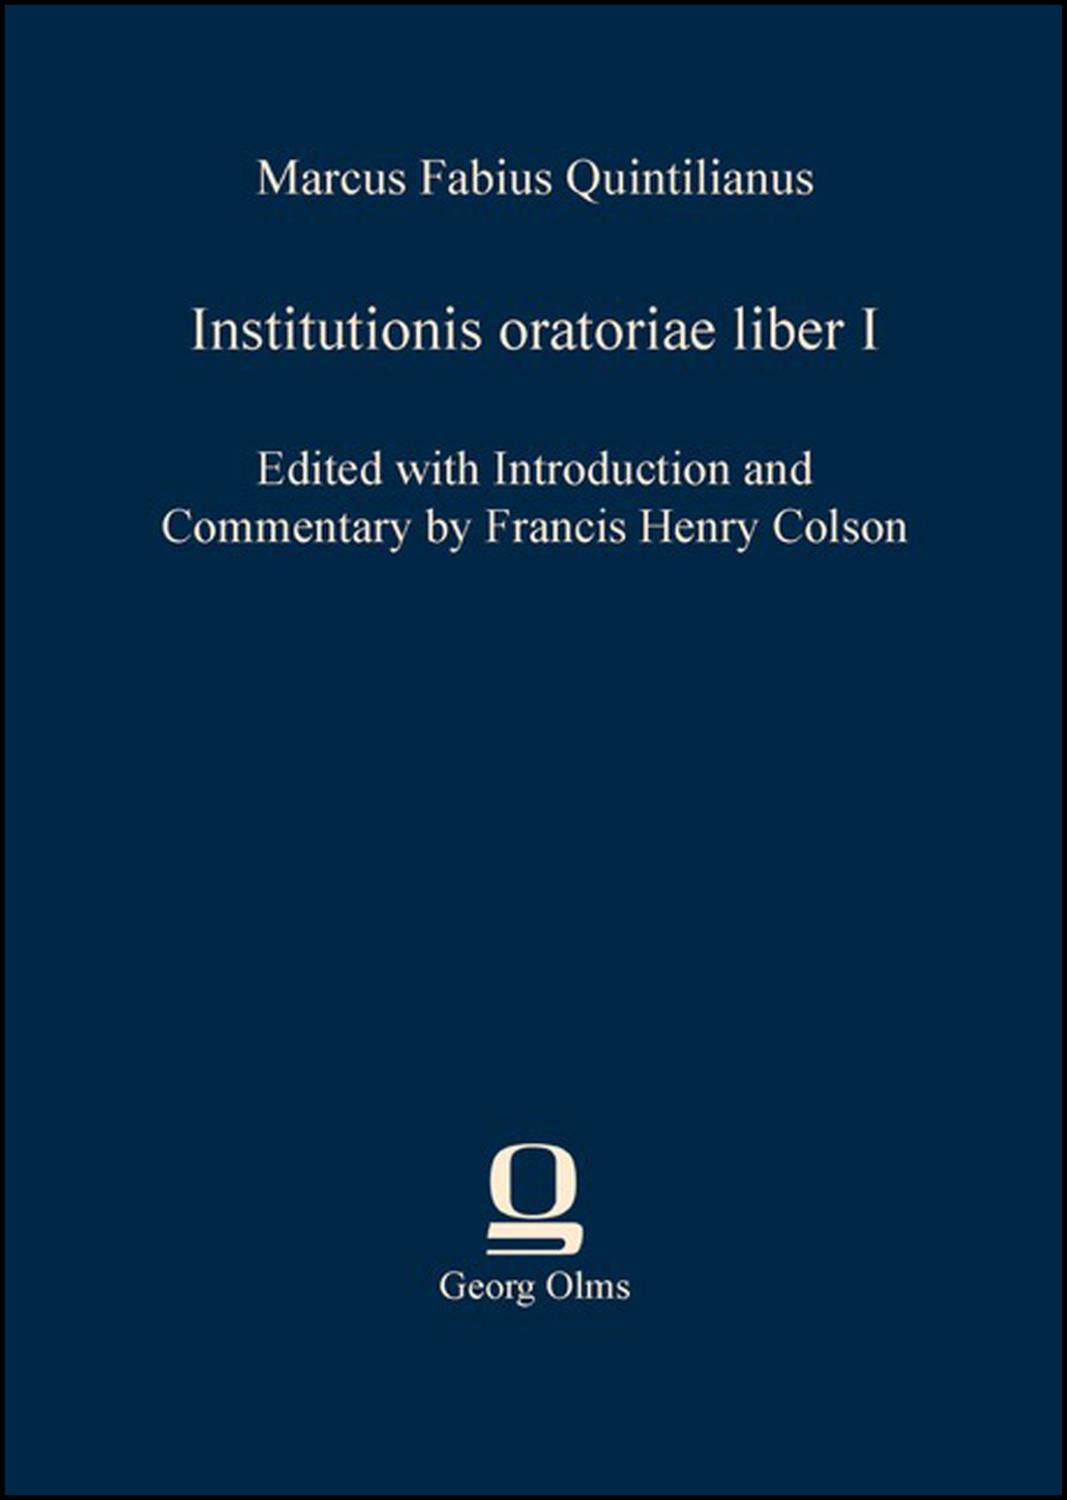 Institutionis oratoriae liber I: Edited with Introduction and Commentary by Francis Henry Colson